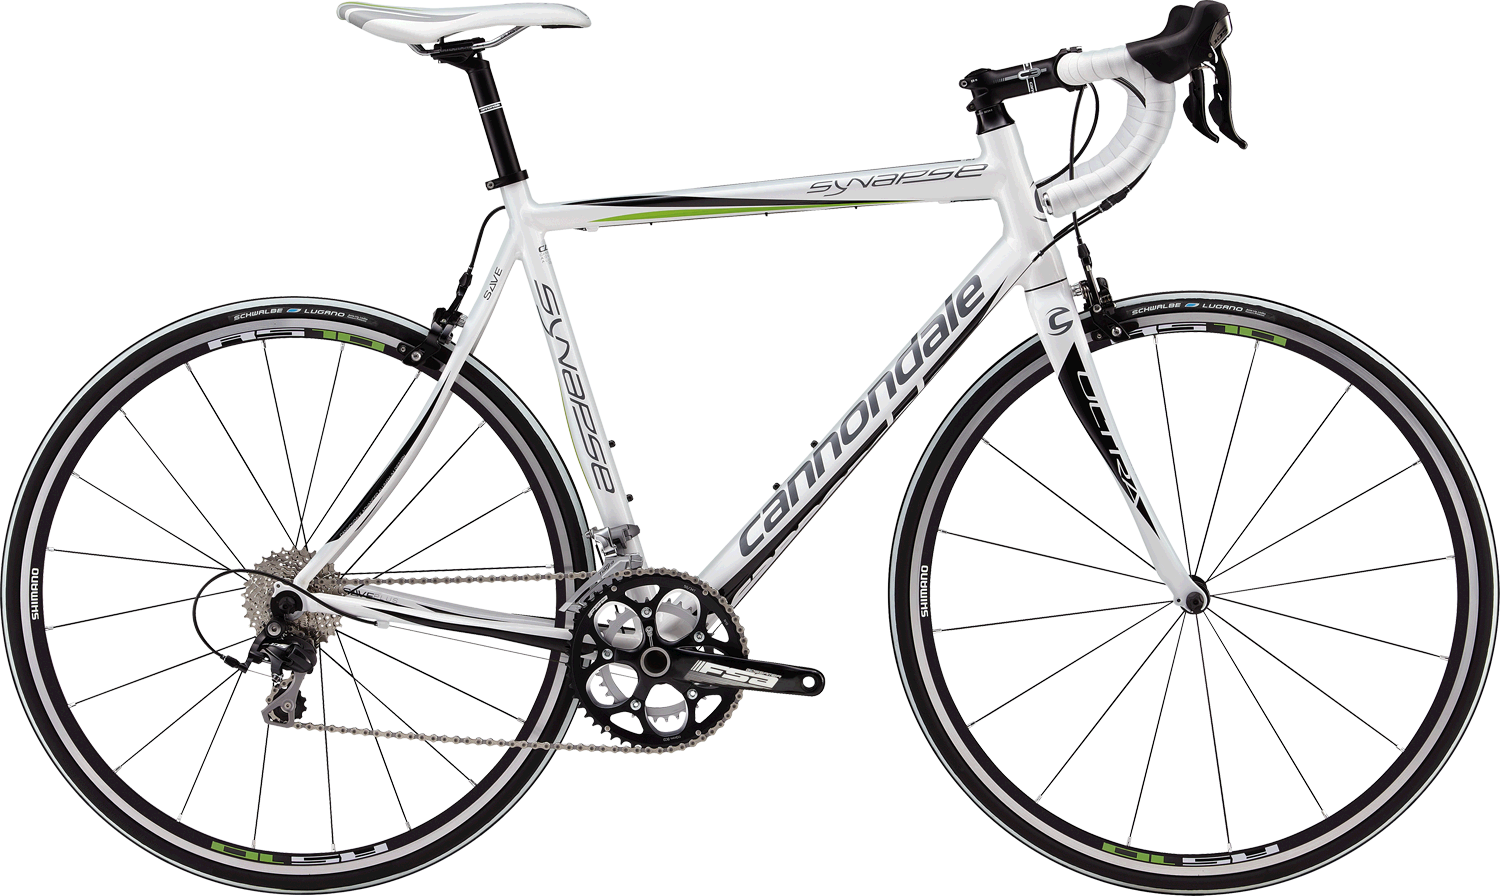 cannondale synapse alloy